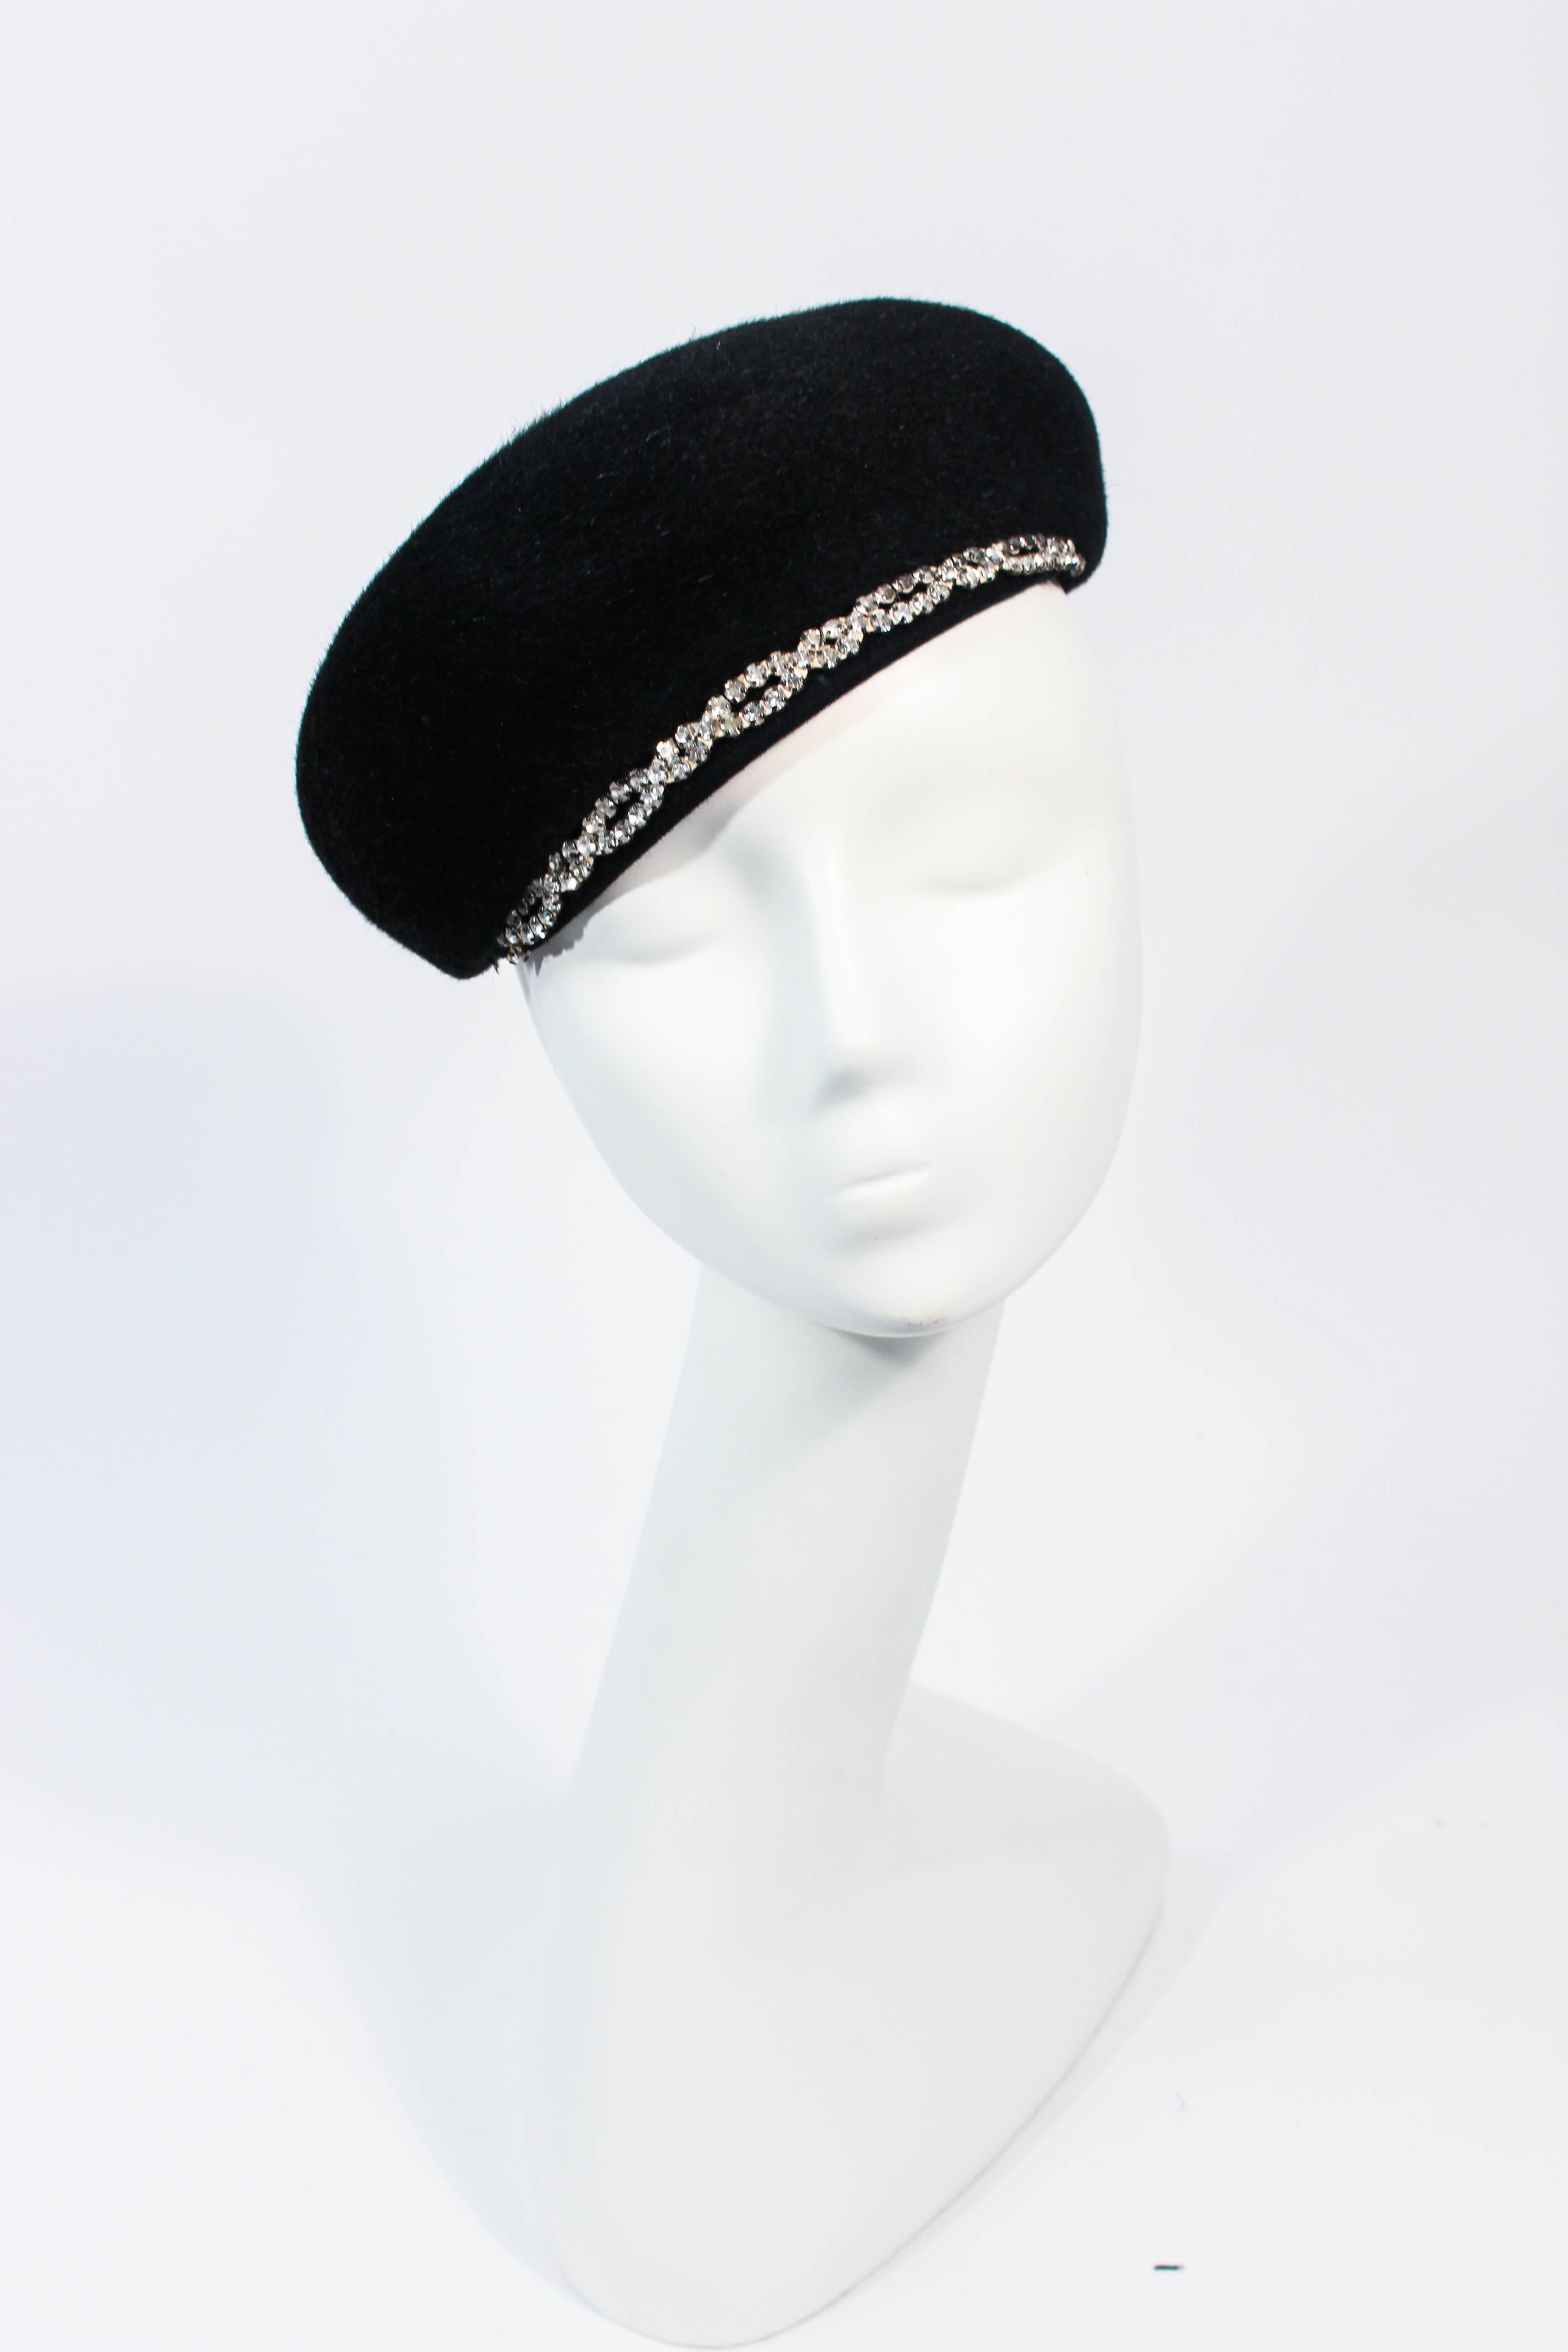 This Schiaparelli design is composed of a black fabric and features a rhinestone trim with two hat pins. Can be styled in a multitude of fashions, an amazing design. In excellent vintage condition.

**Please cross-reference measurements for personal